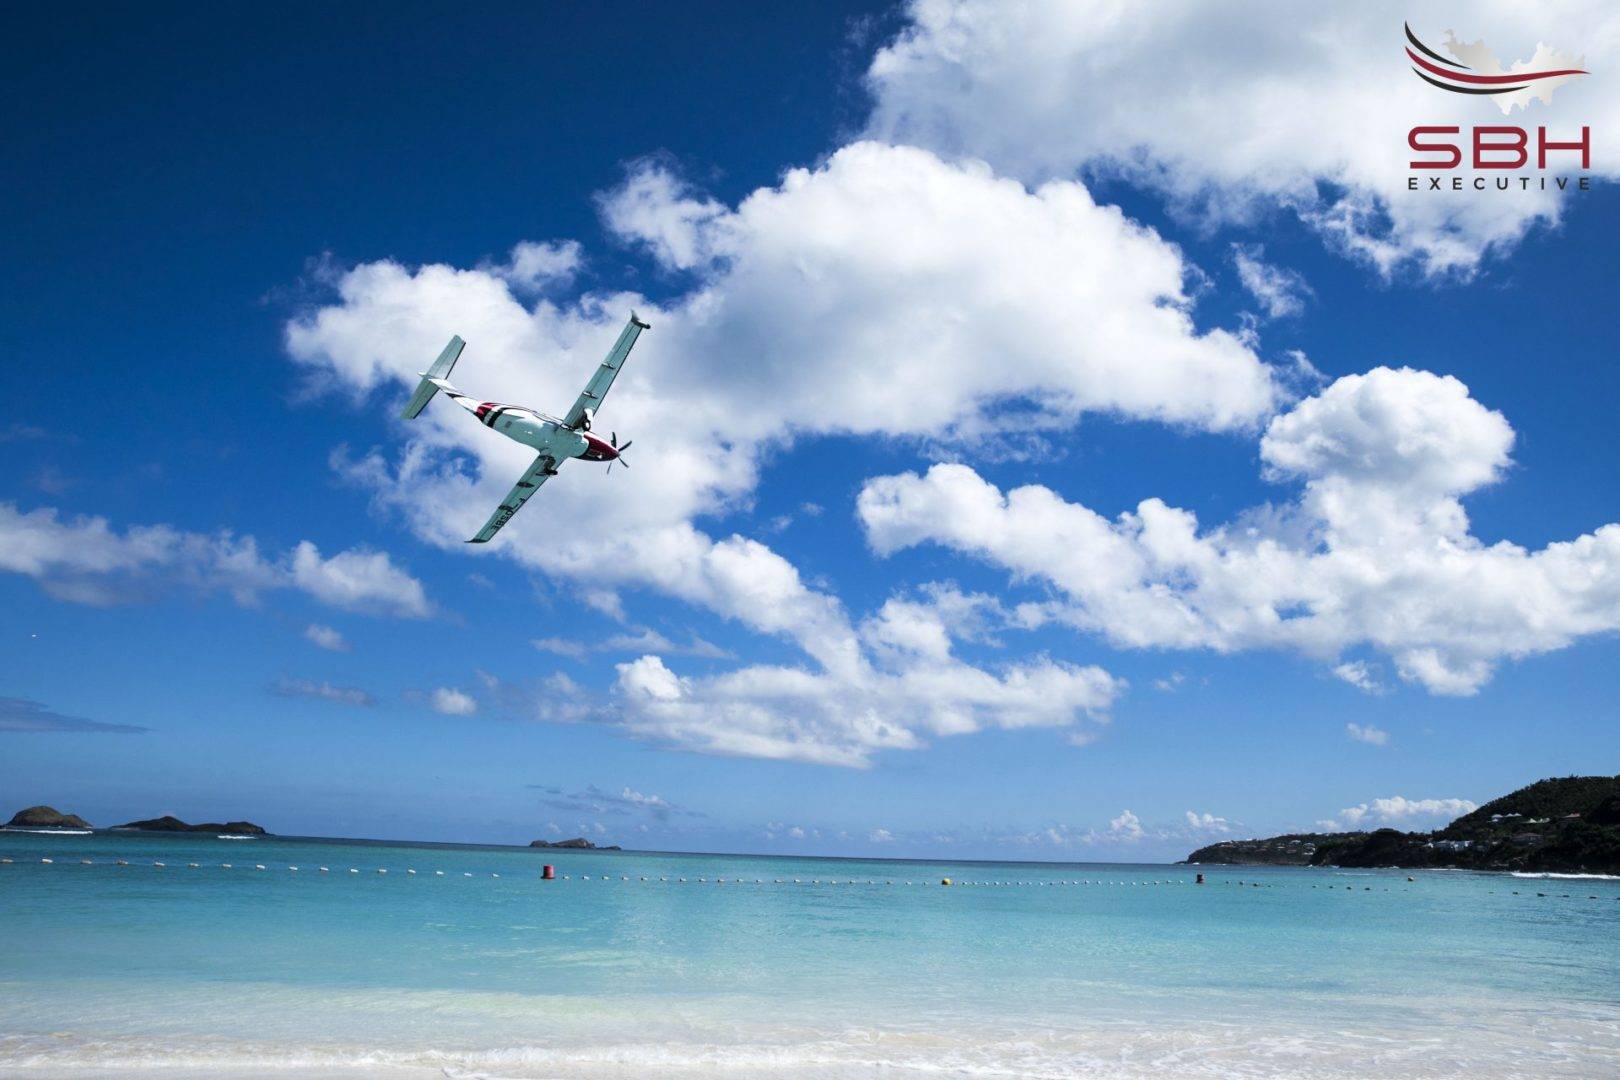 9-St-Barth-executive-Private-Charter-Flights-Airline-Airport.jpg